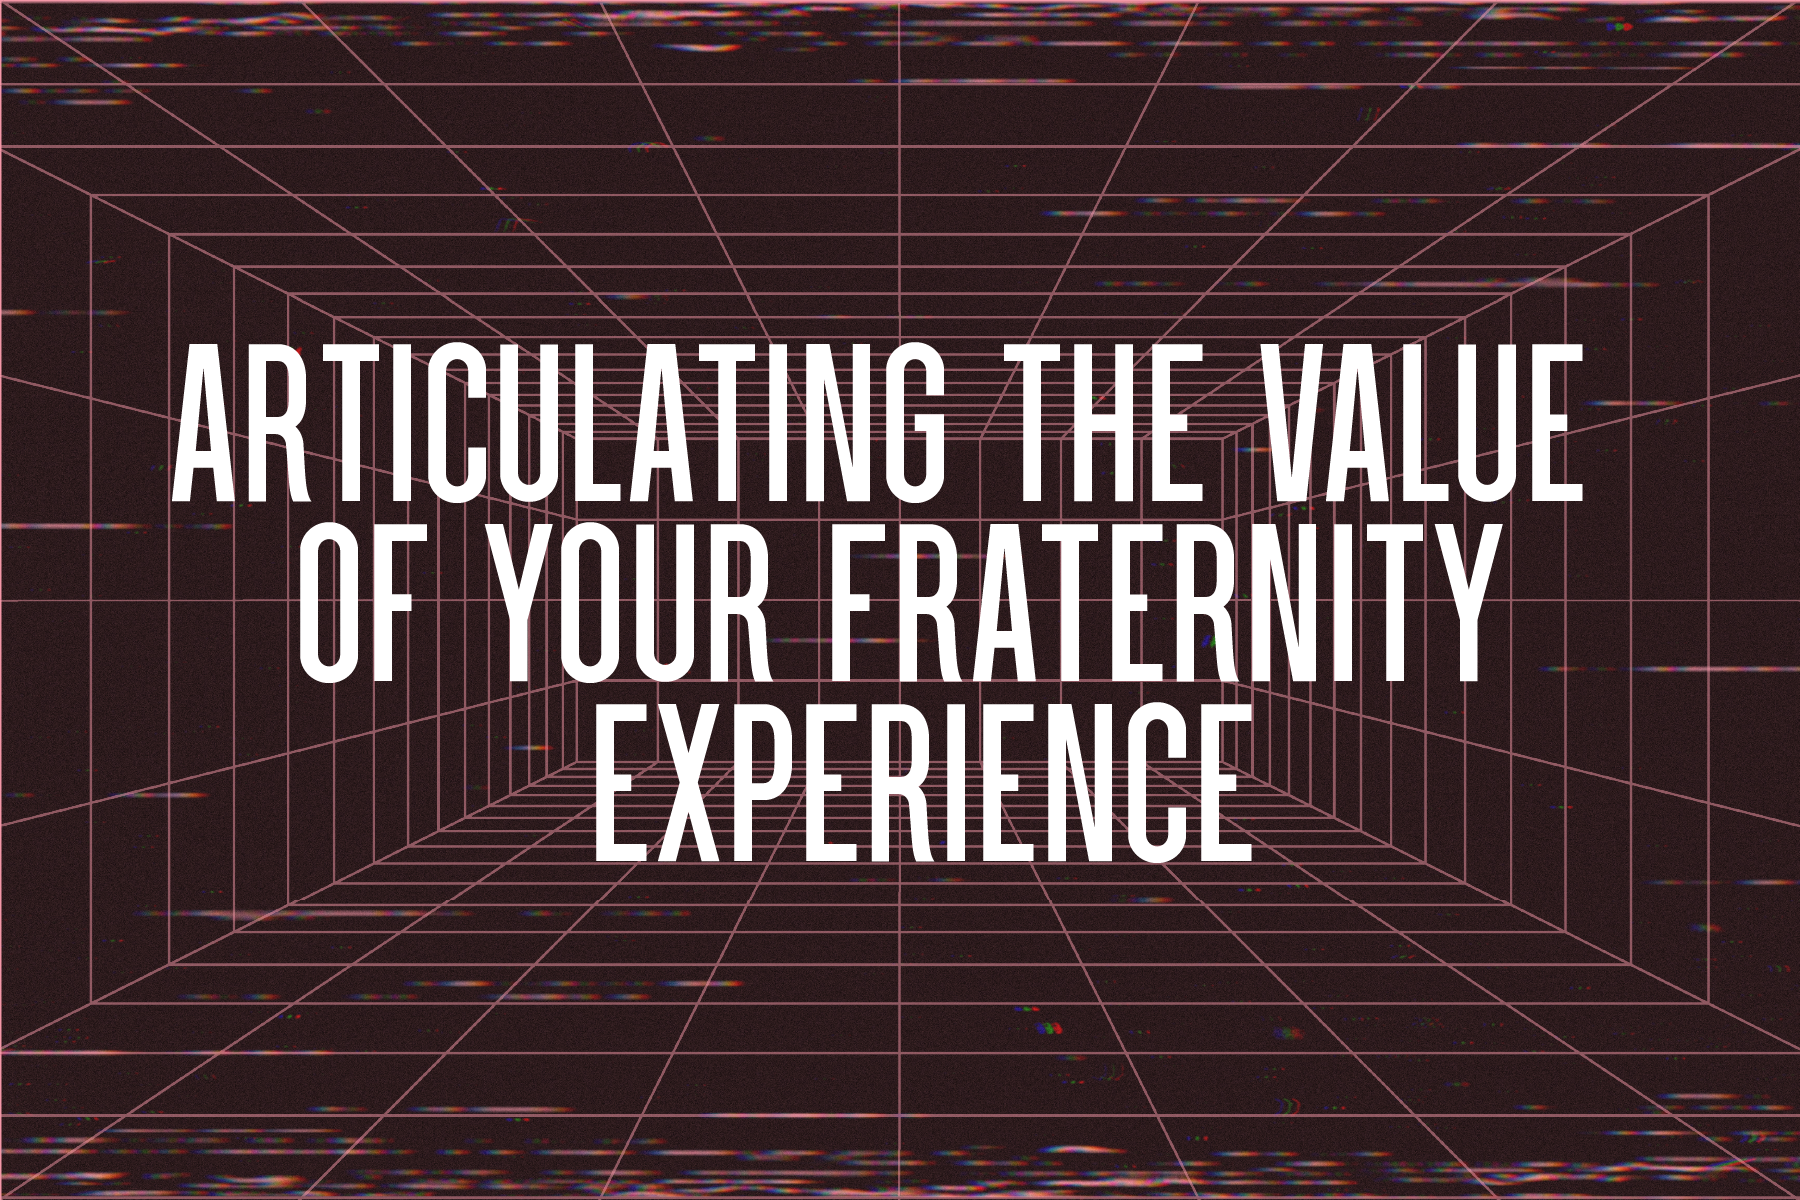 Articulating the Value of Your Fraternity Experience